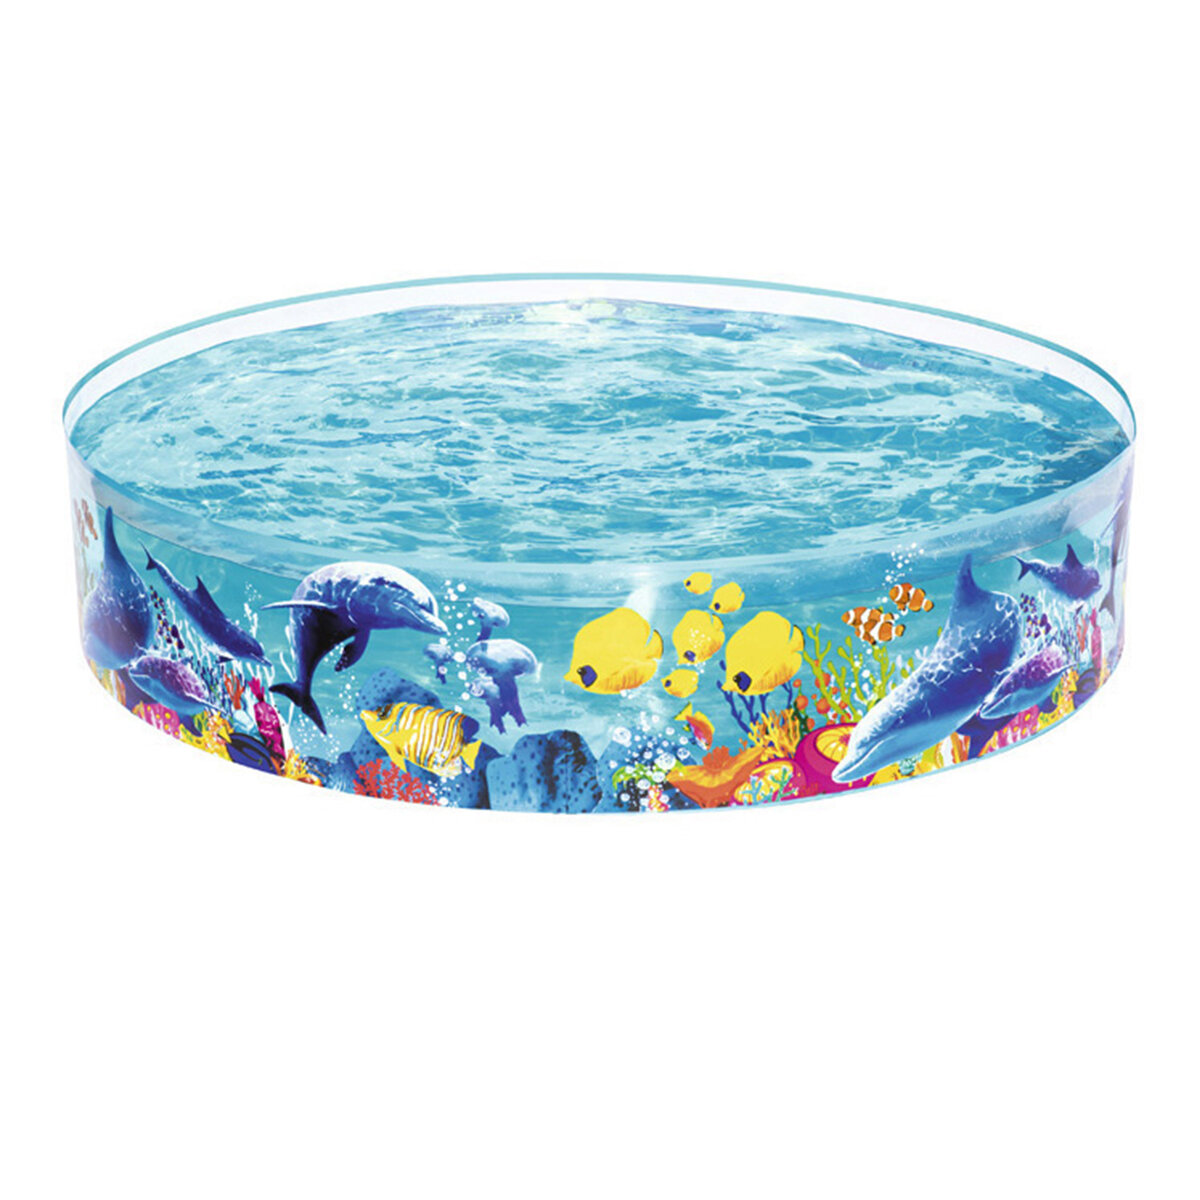 Portable Floding Swimming Pools PVC Family Playing Bathing Tub Summer and Kiddie Pond for Outdoor Furniture